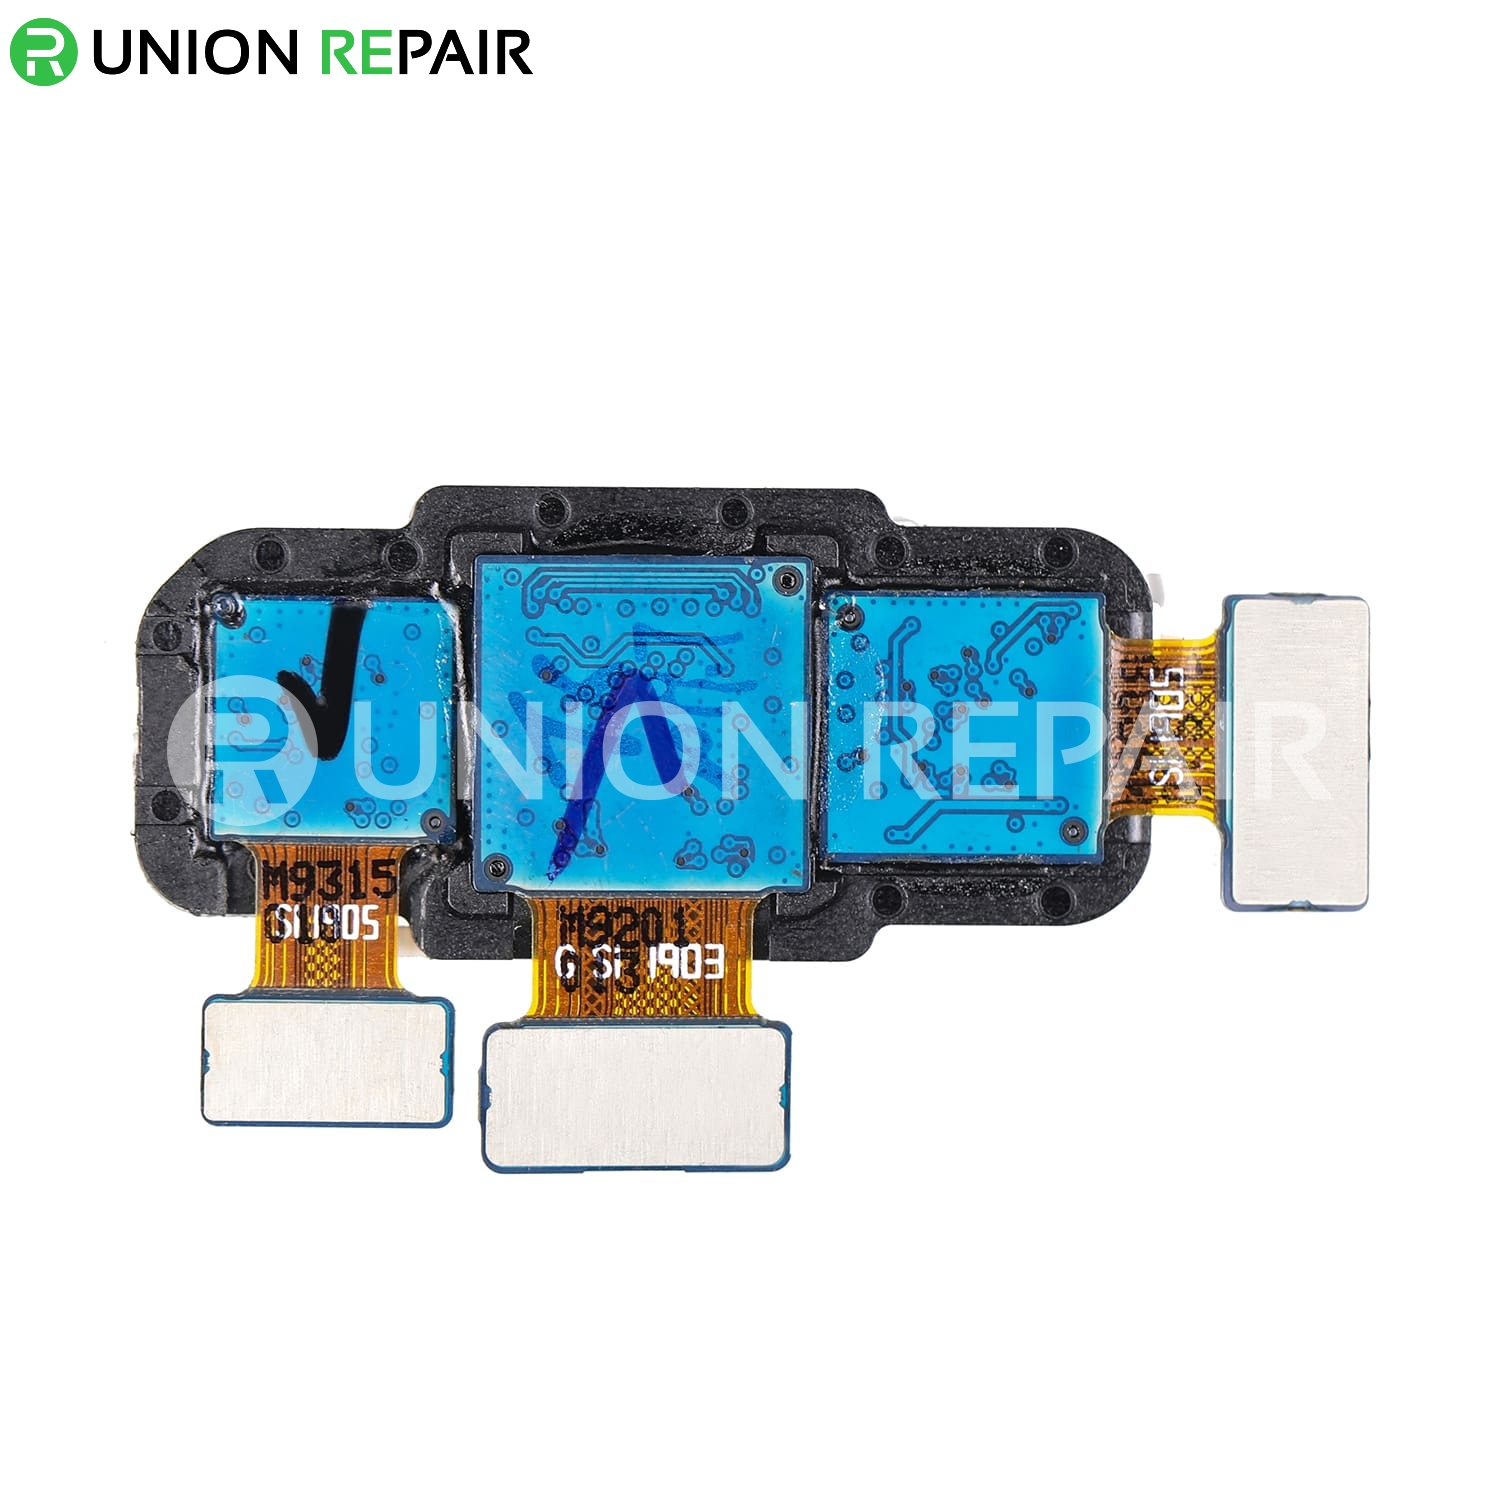 Replacement for Samsung Galaxy A7 (2018) SM-750 Rear Camera